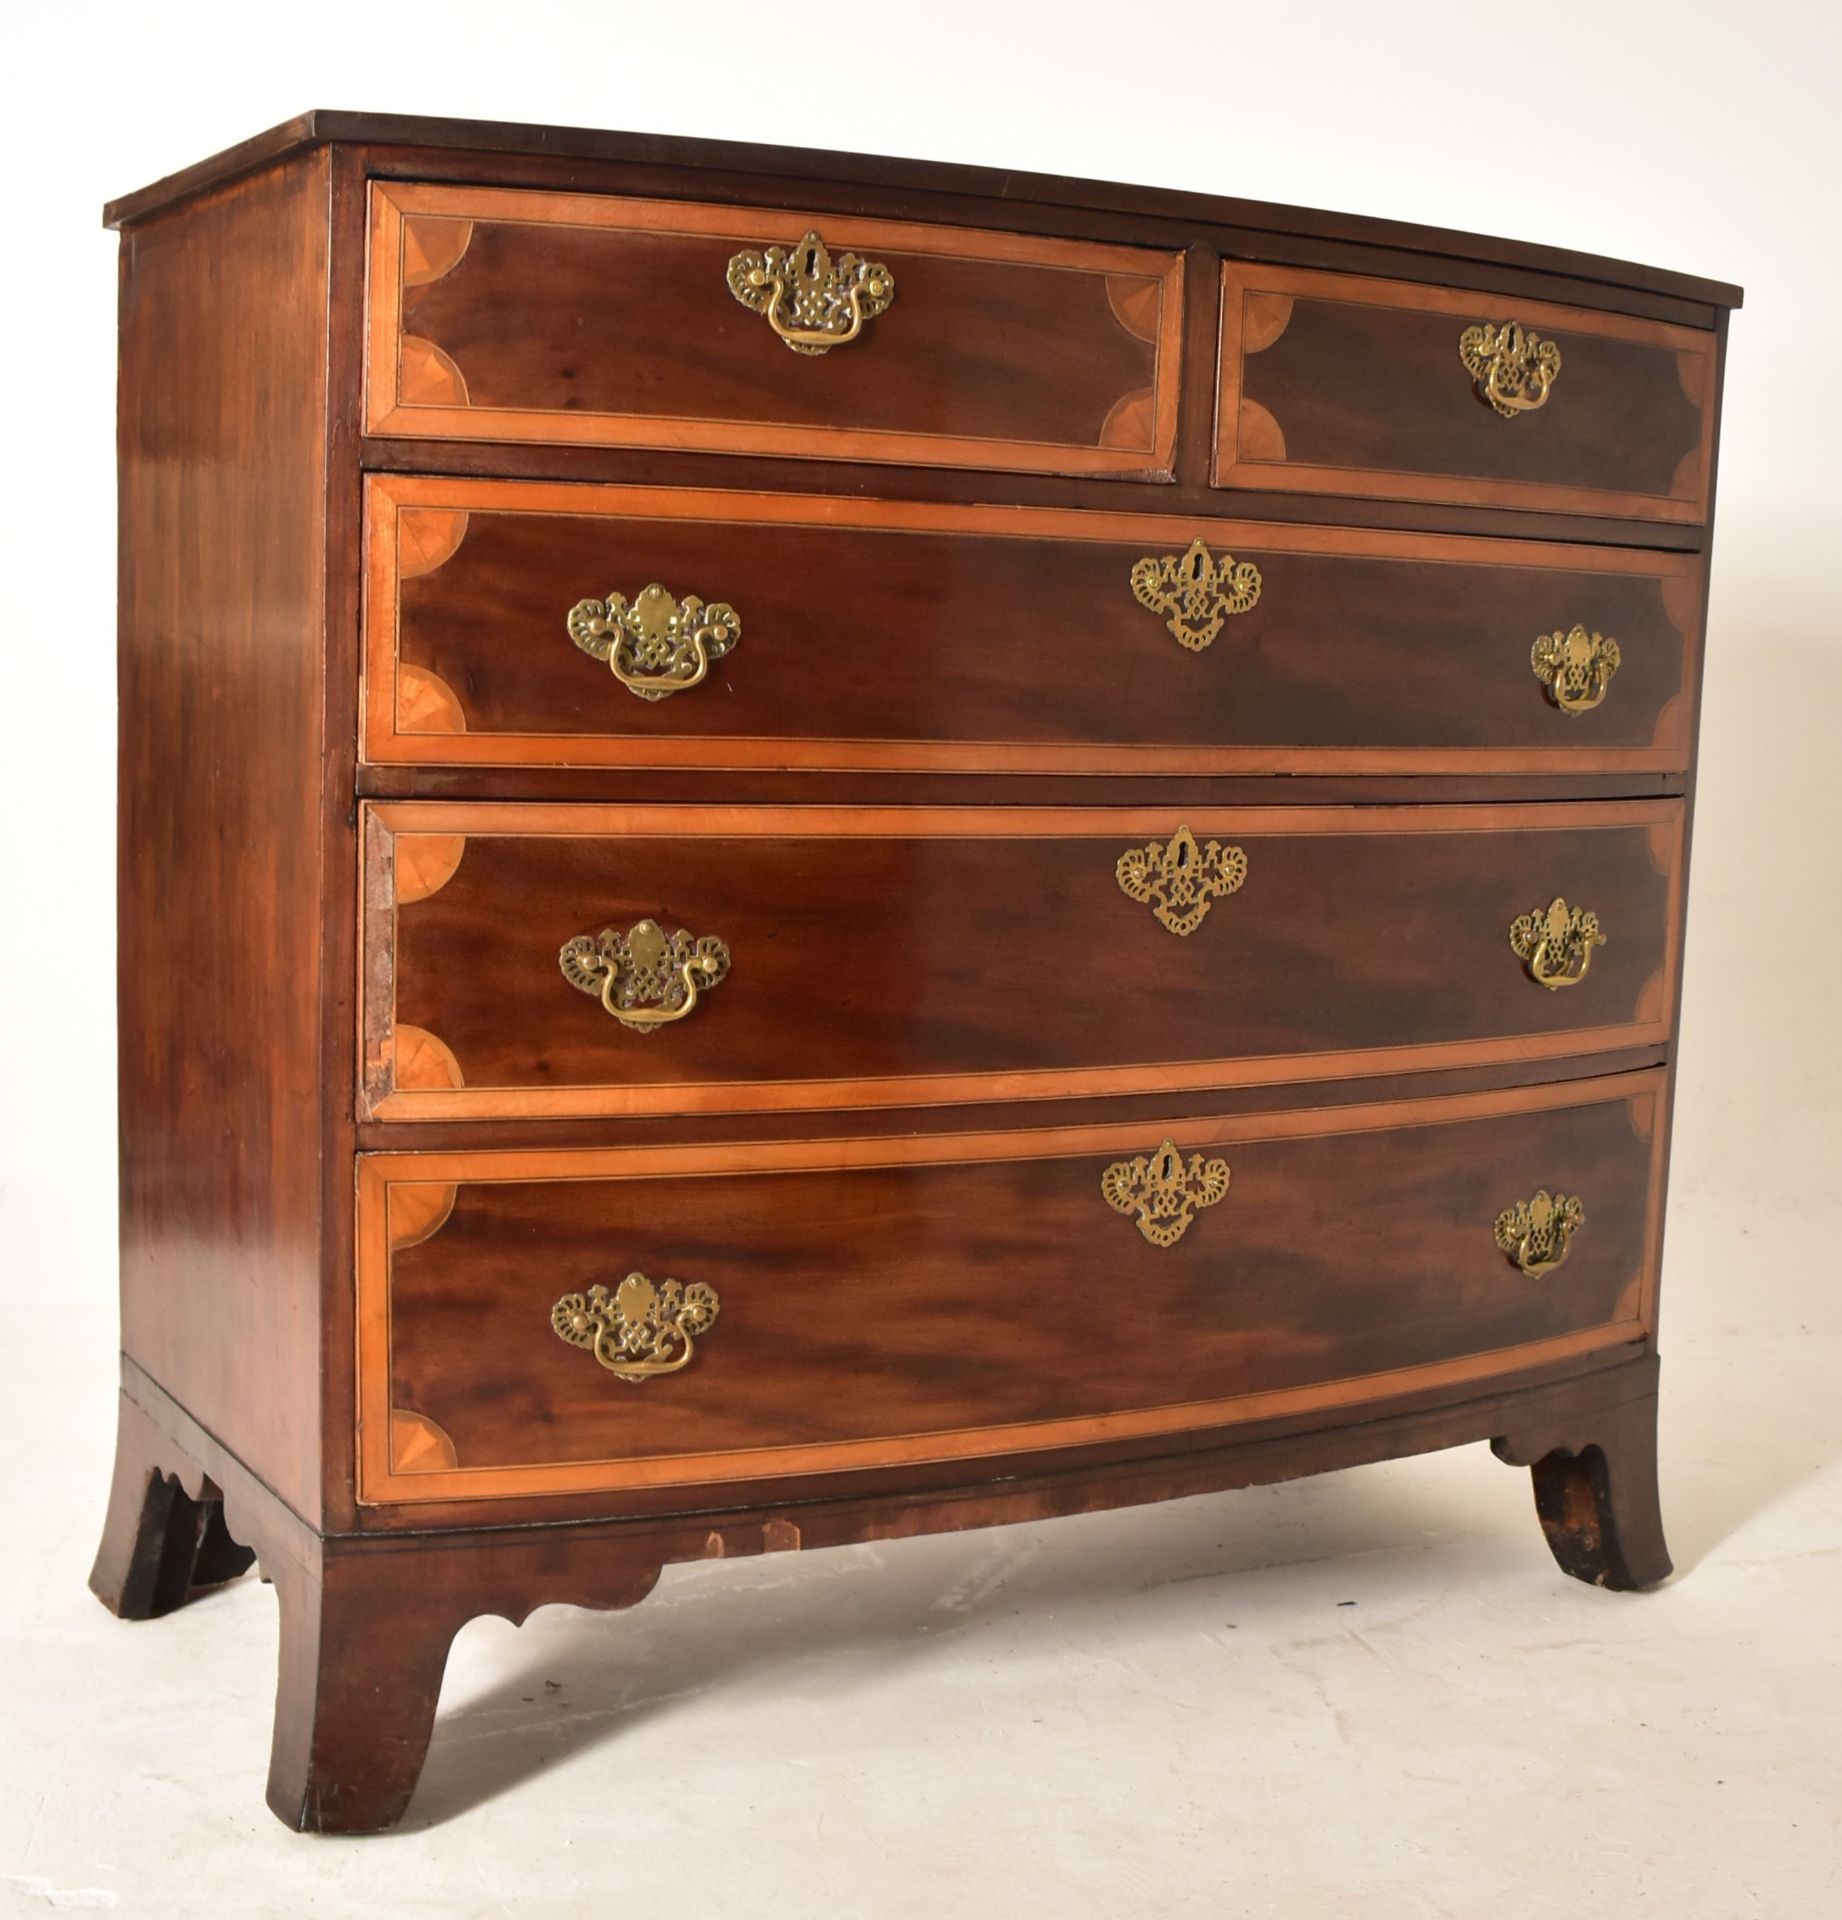 18TH CENTURY MAHOGANY BOW FRONT INLAID CHEST OF DRAWERS